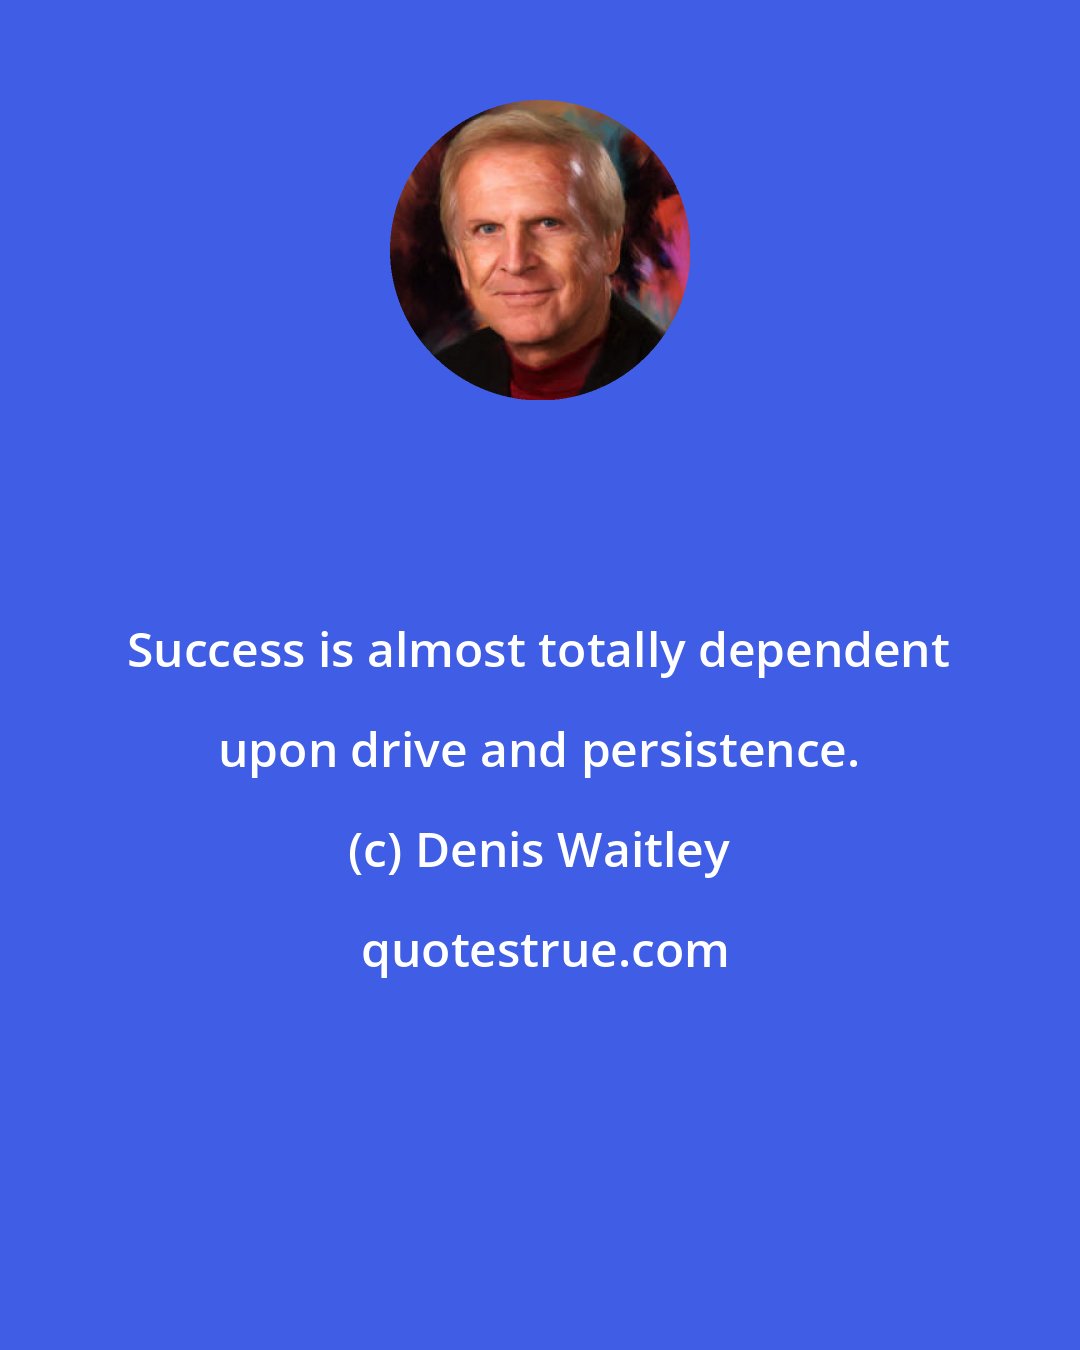 Denis Waitley: Success is almost totally dependent upon drive and persistence.